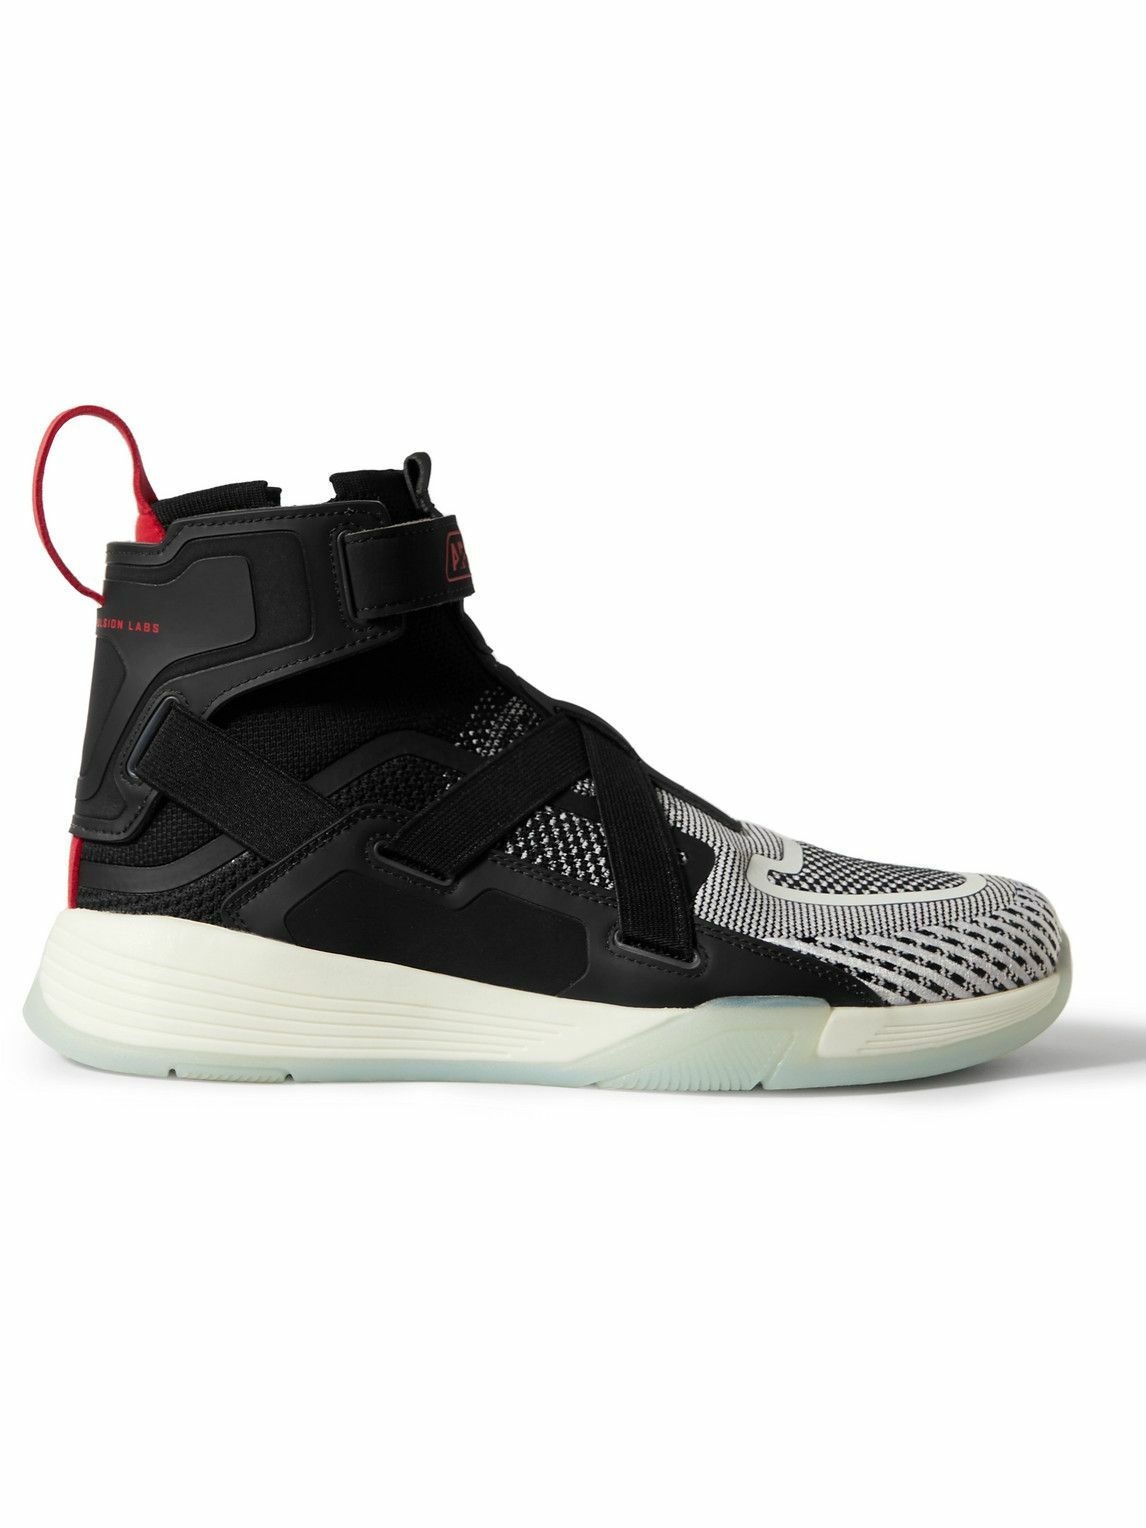 Photo: APL Athletic Propulsion Labs - Superfuture TechLoom and TPU High-Top Running Sneakers - Black